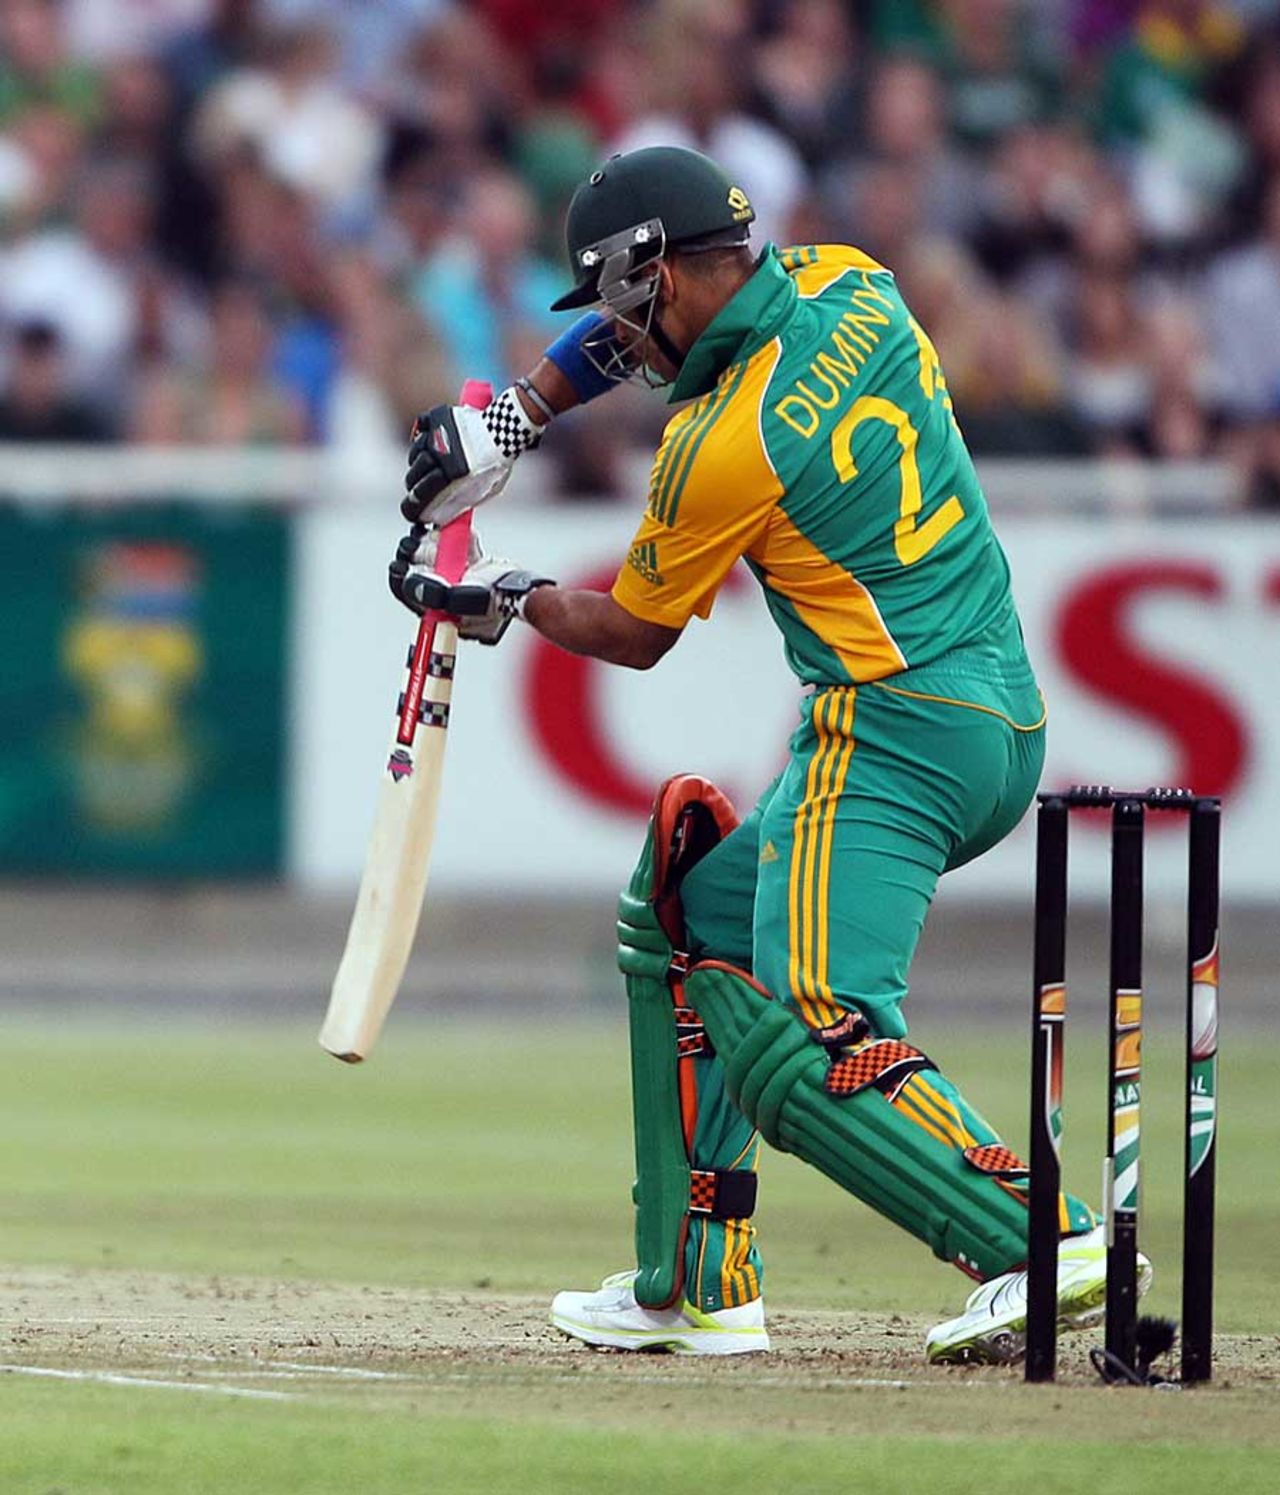 JP Duminy shapes to drive as he leads South Africa's recovery, South Africa v Australia, 1st Twenty20, Cape Town, October 13, 2011